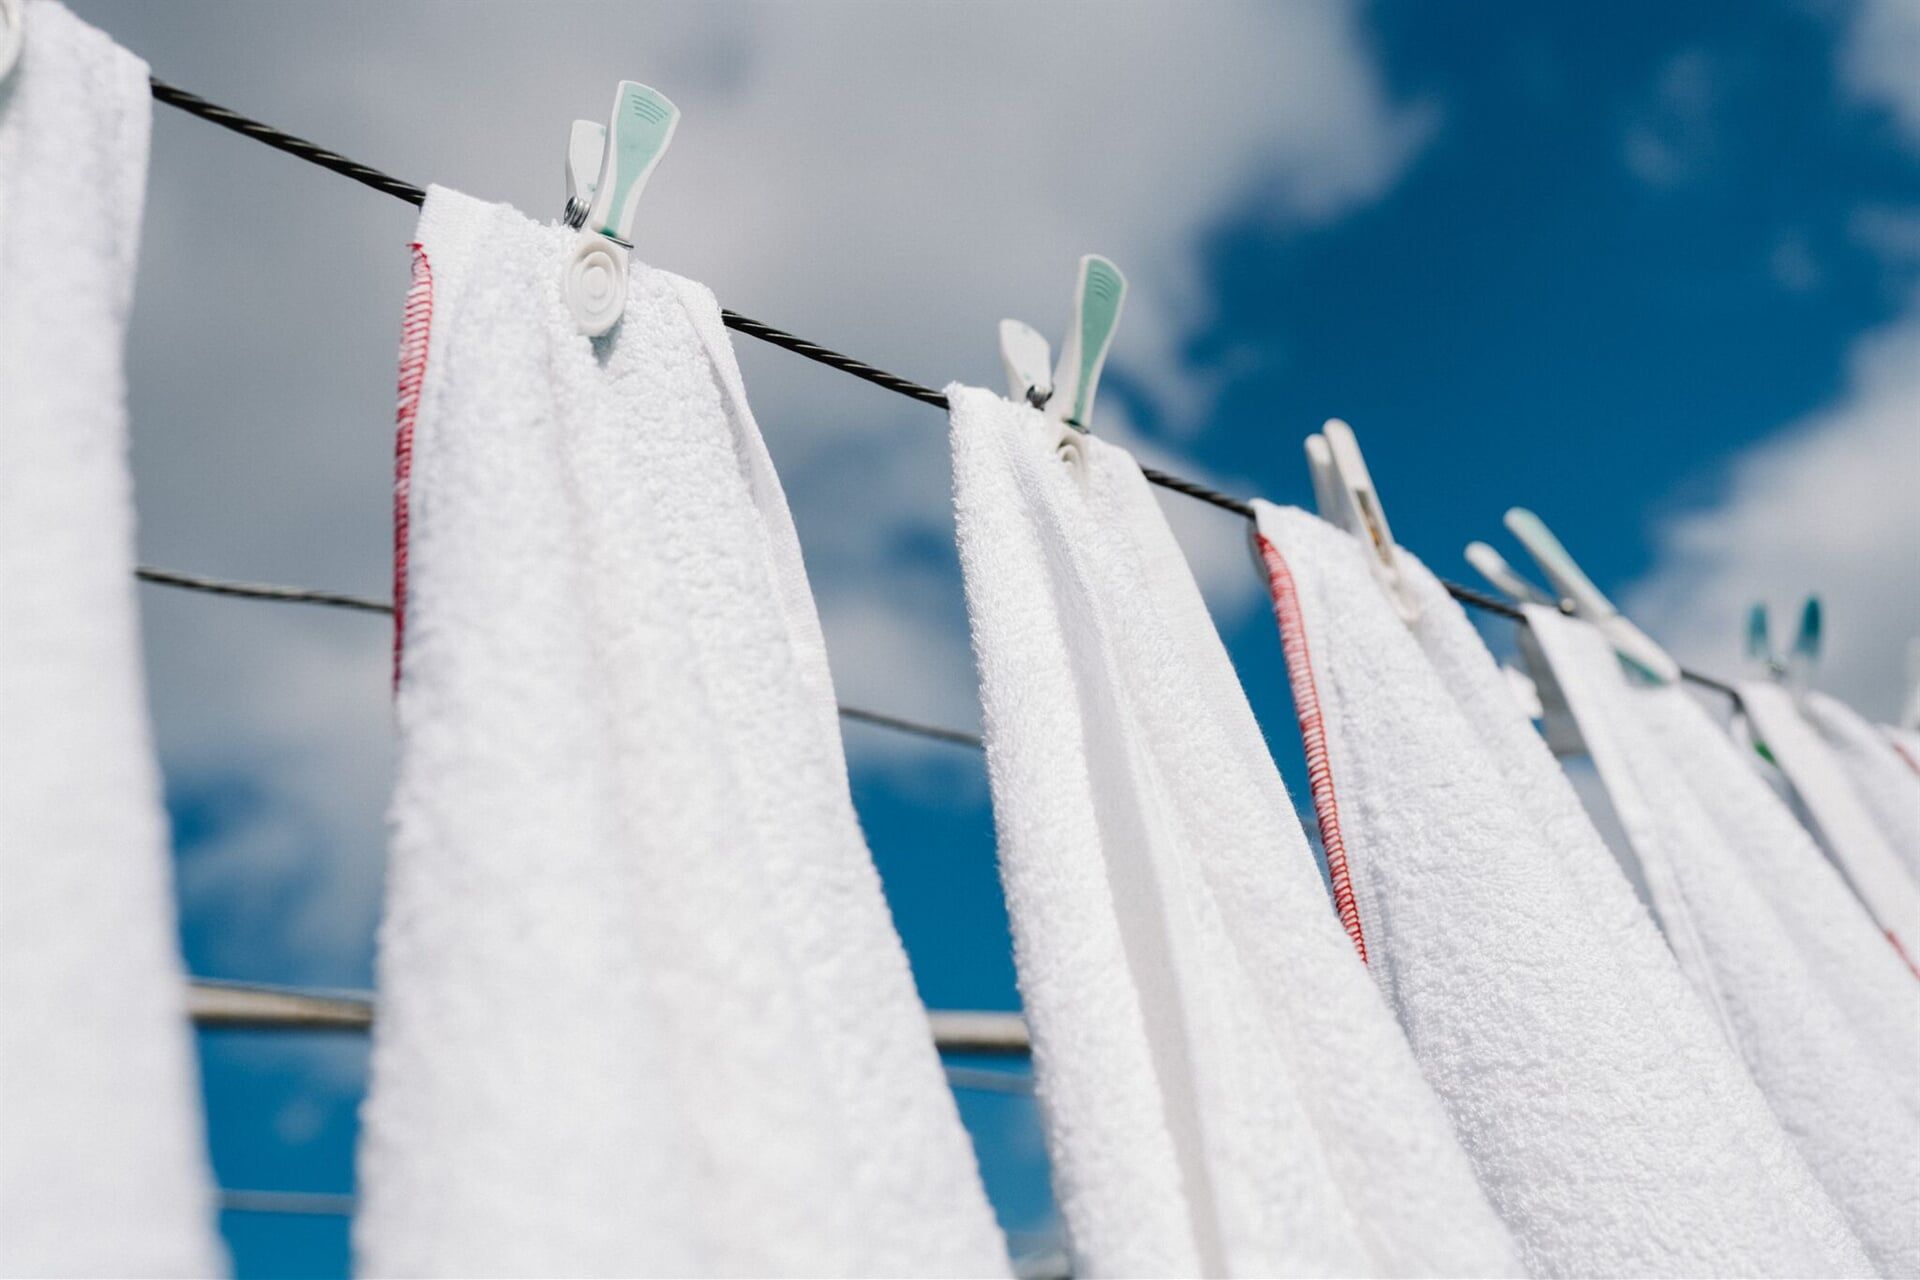 Clean sheets hanging on a line | Attention to detail